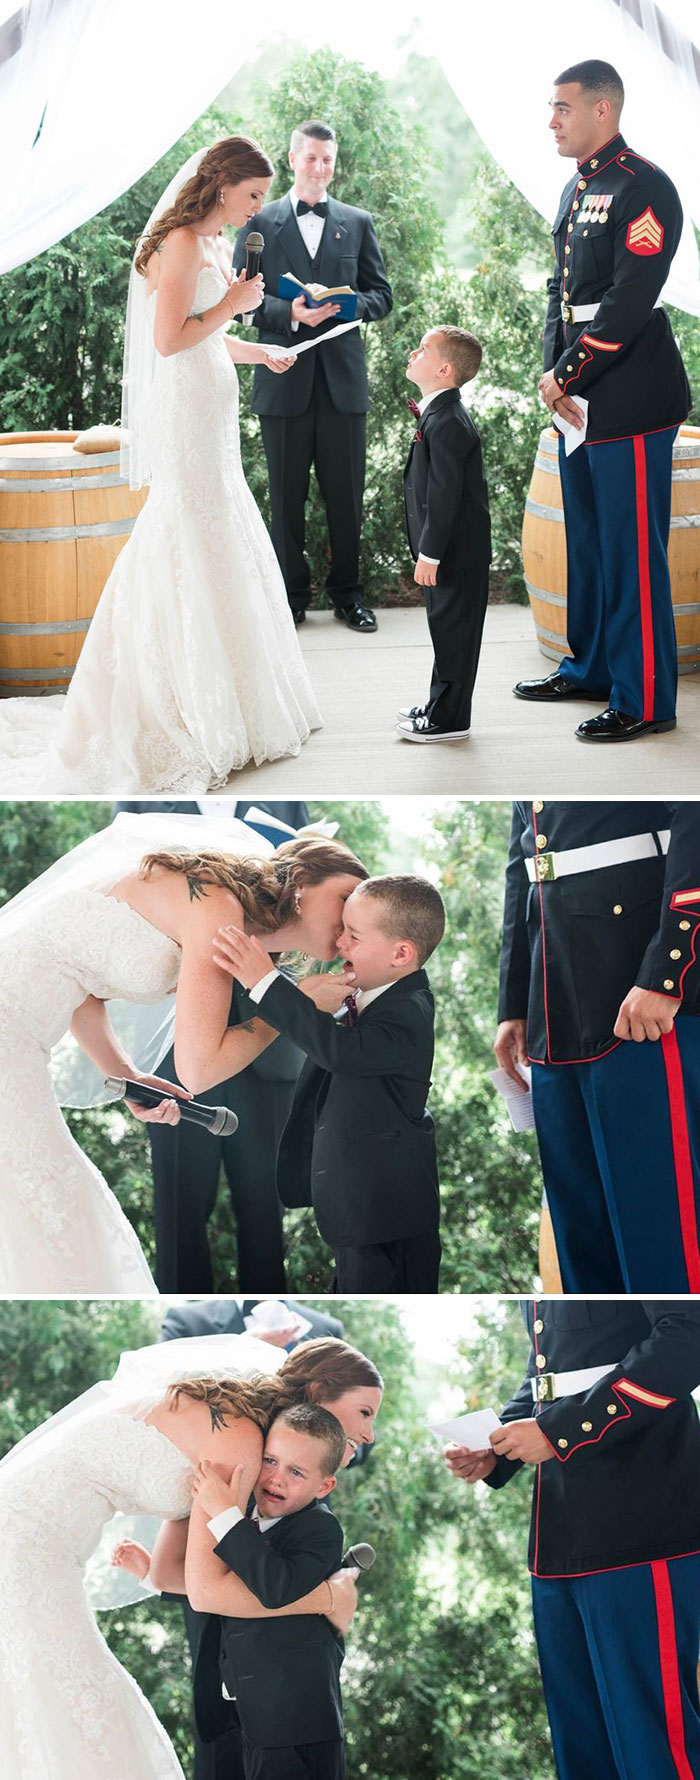 "Life Gave Me The Gift Of You" - Marine's 4 Year Old Son Cries Tears Of Joy After Hearing New Step-Mom's Vows For Him